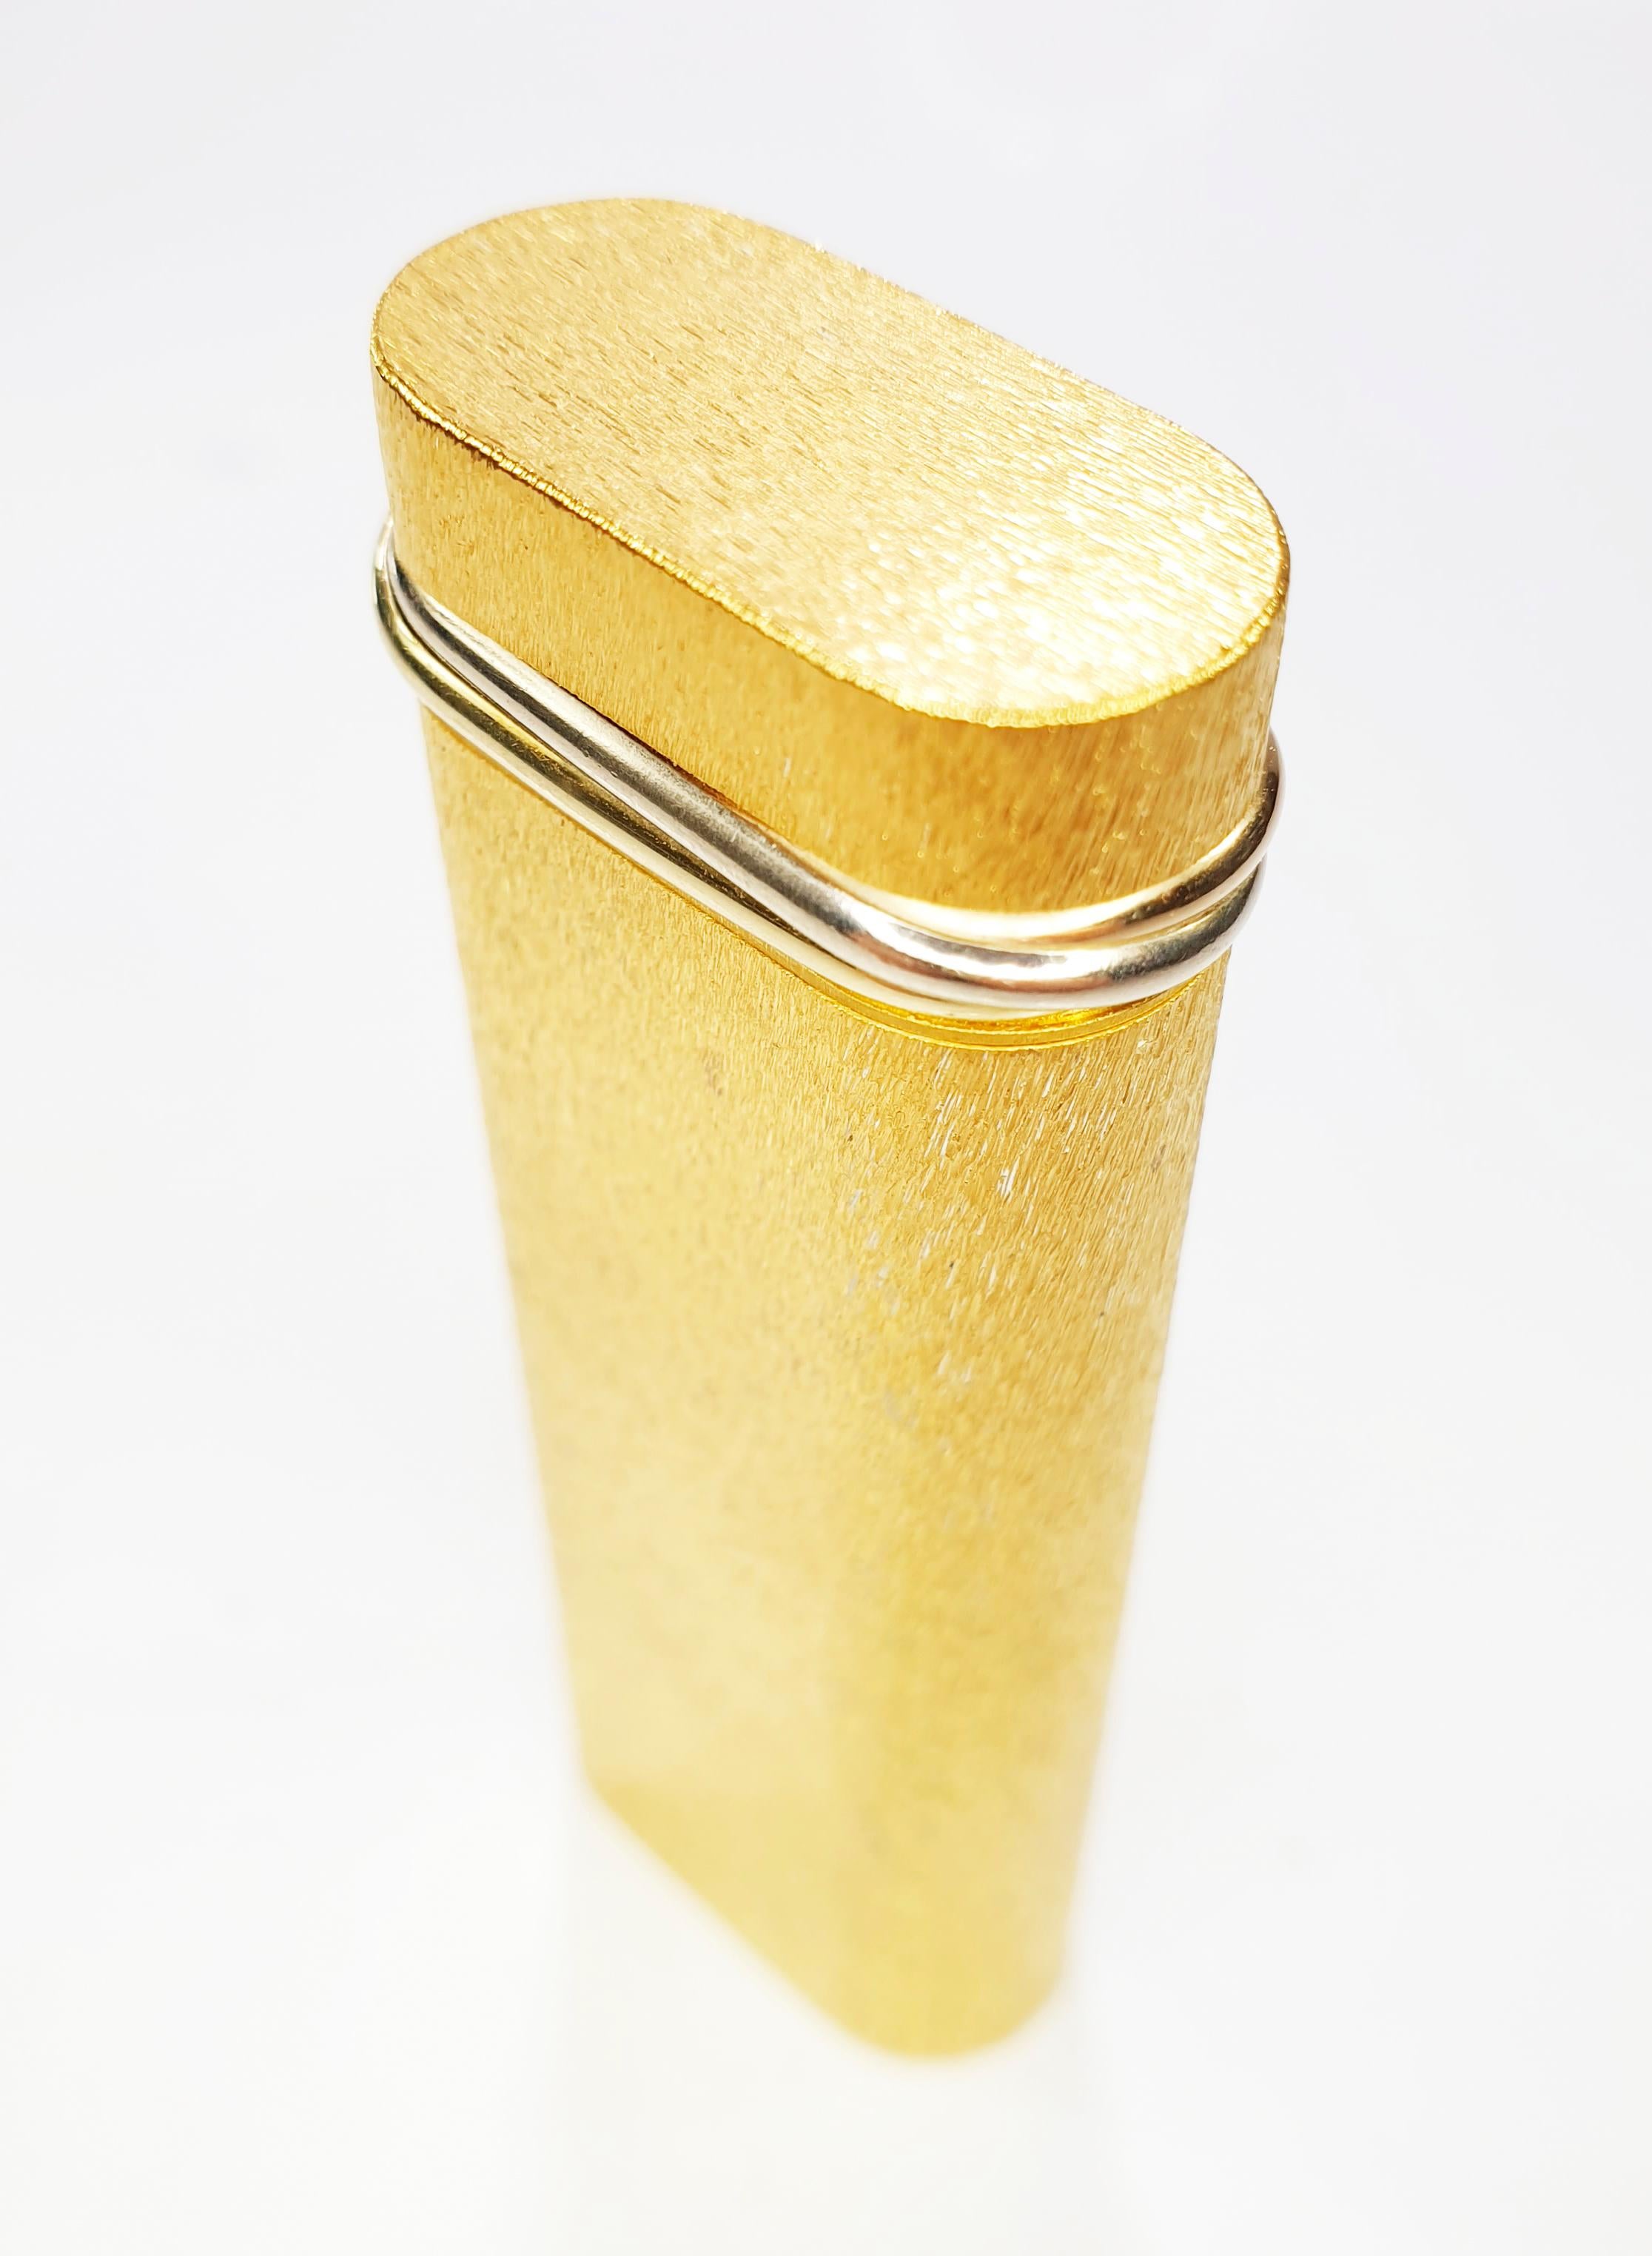 Pocket Trinity Cartier lighter  in 18-karat gold-plated textured finish with tri coloured gold collar an oval shaped body and a ribbed/fluted design. 
It has a flip-top lid that houses the Swiss-made mechanism. The flint wheel pivots when opened and